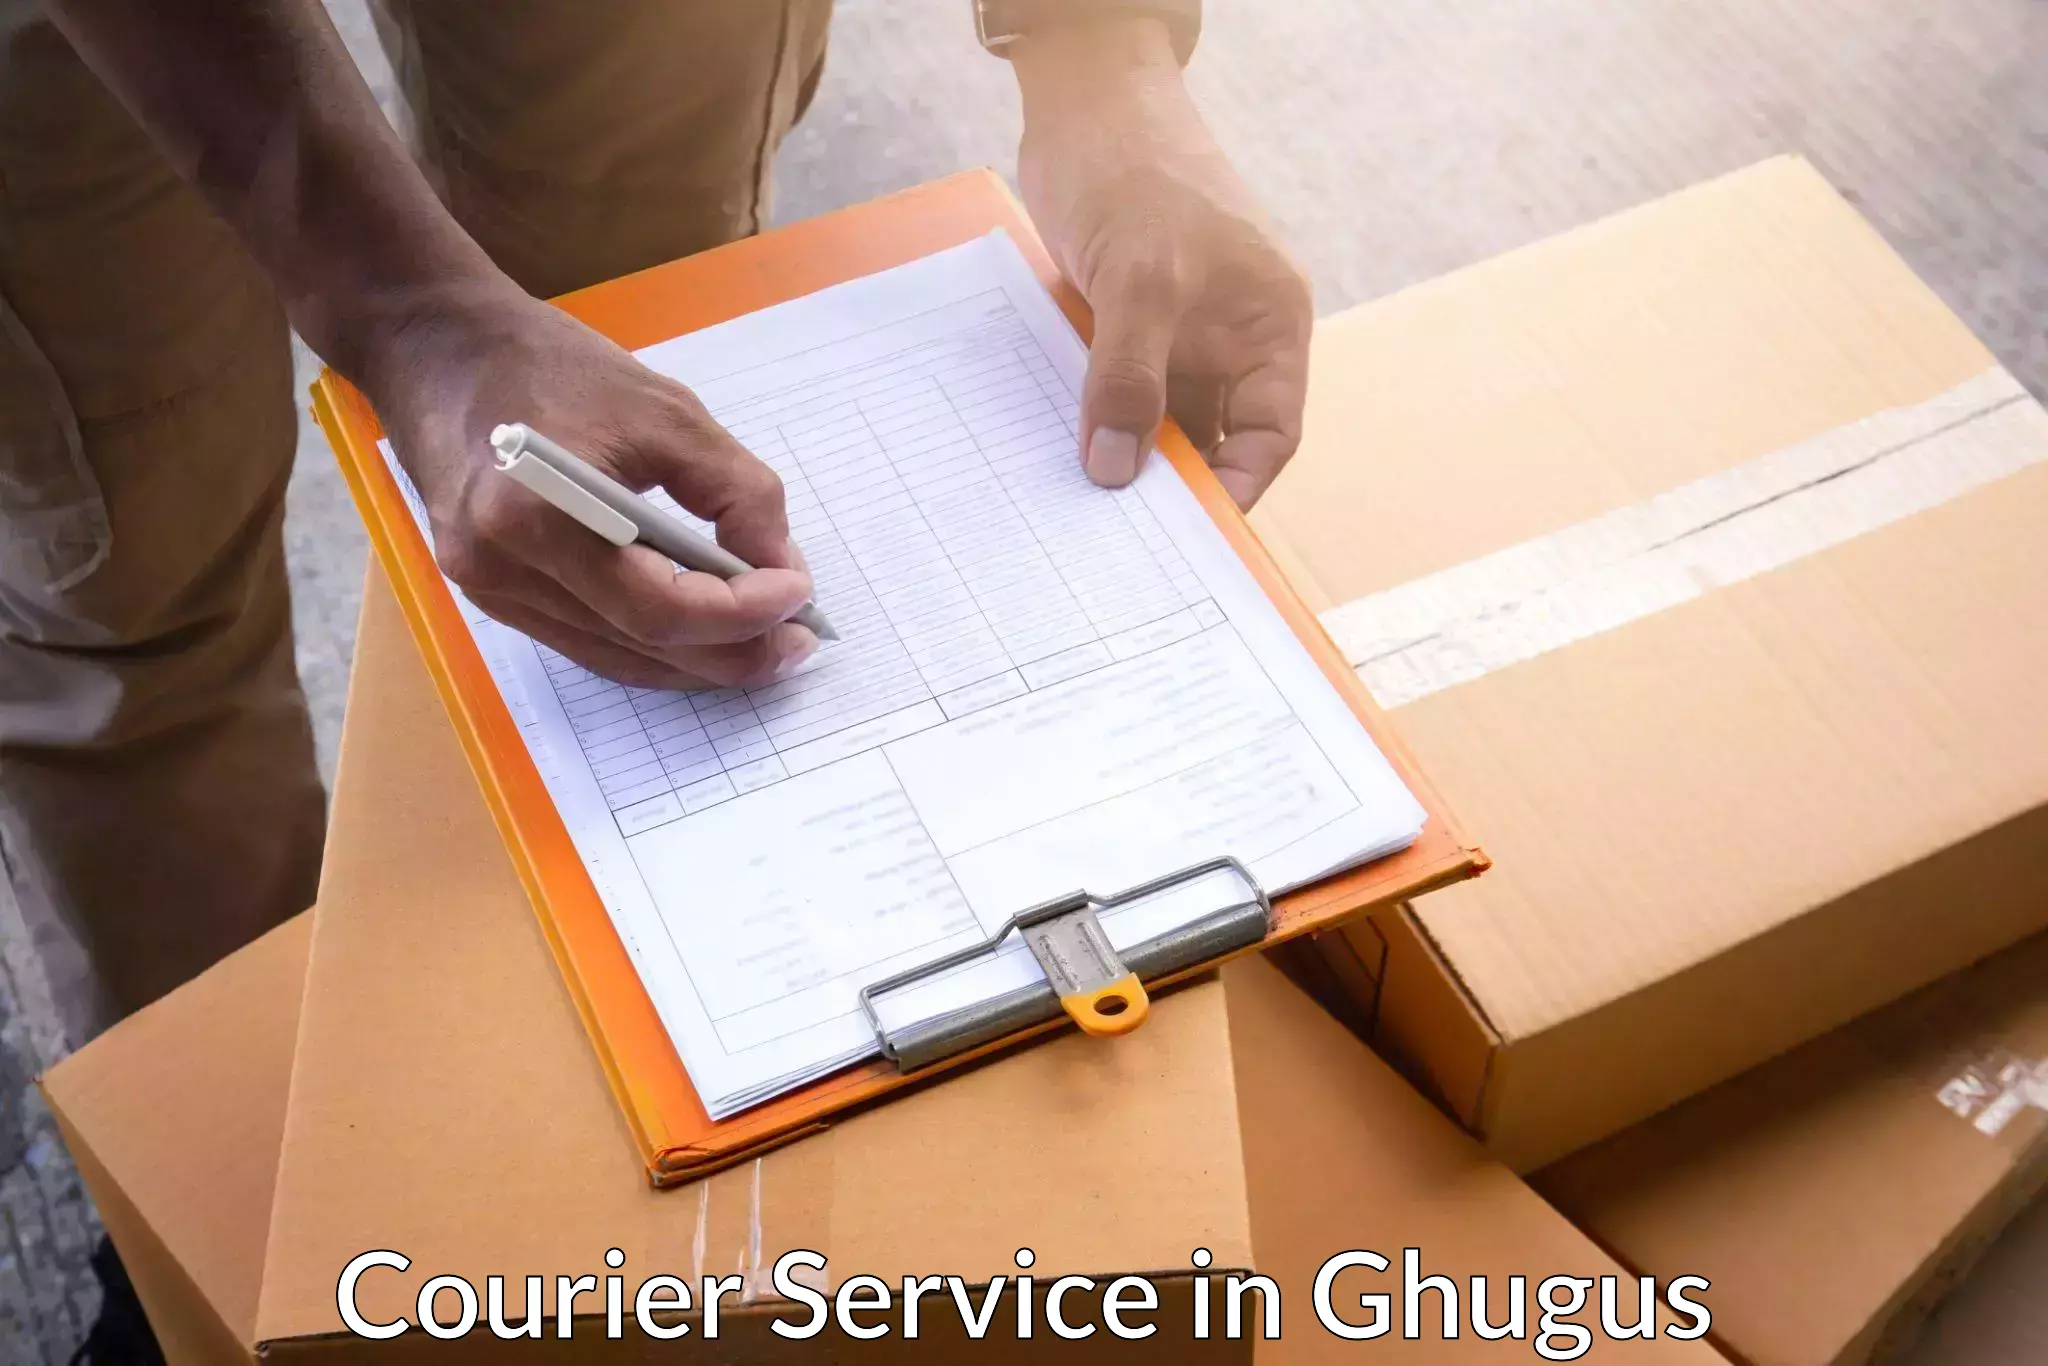 Fastest parcel delivery in Ghugus